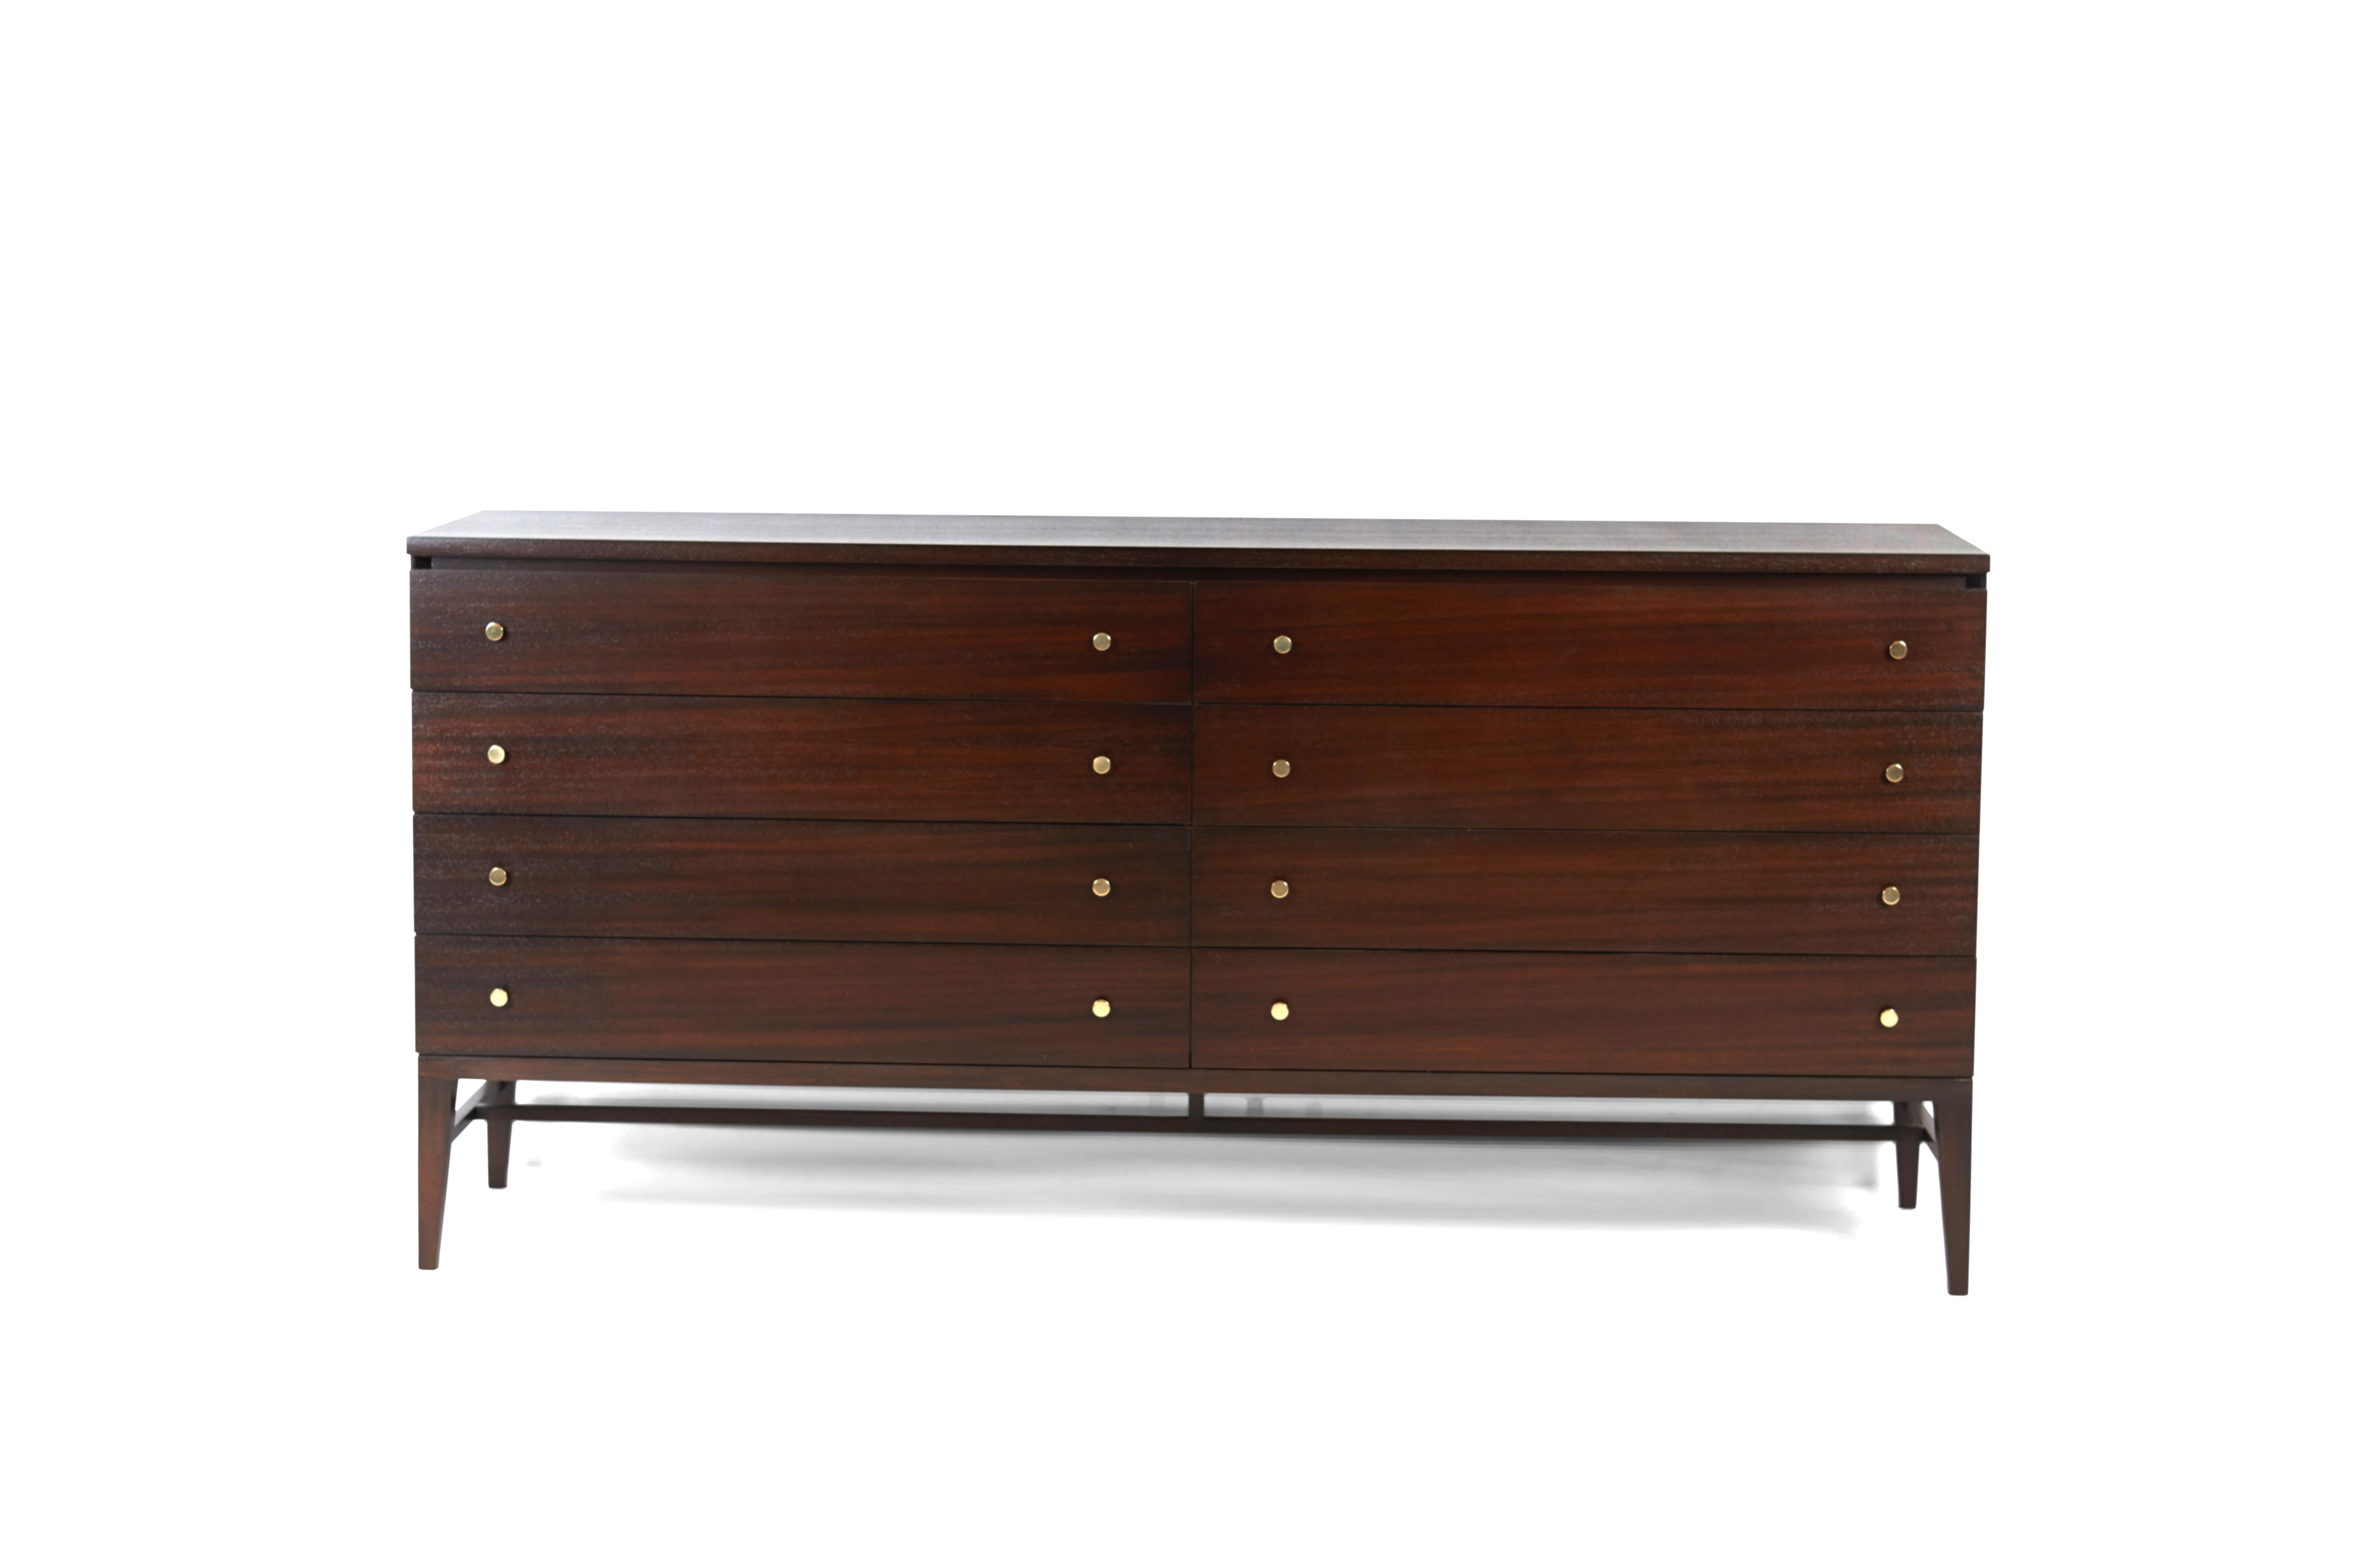 8-drawer dresser by Paul McCobb for Calvin Furniture. Cabinet has been fully restored or refinished. Retains original label and brass pulls.
 